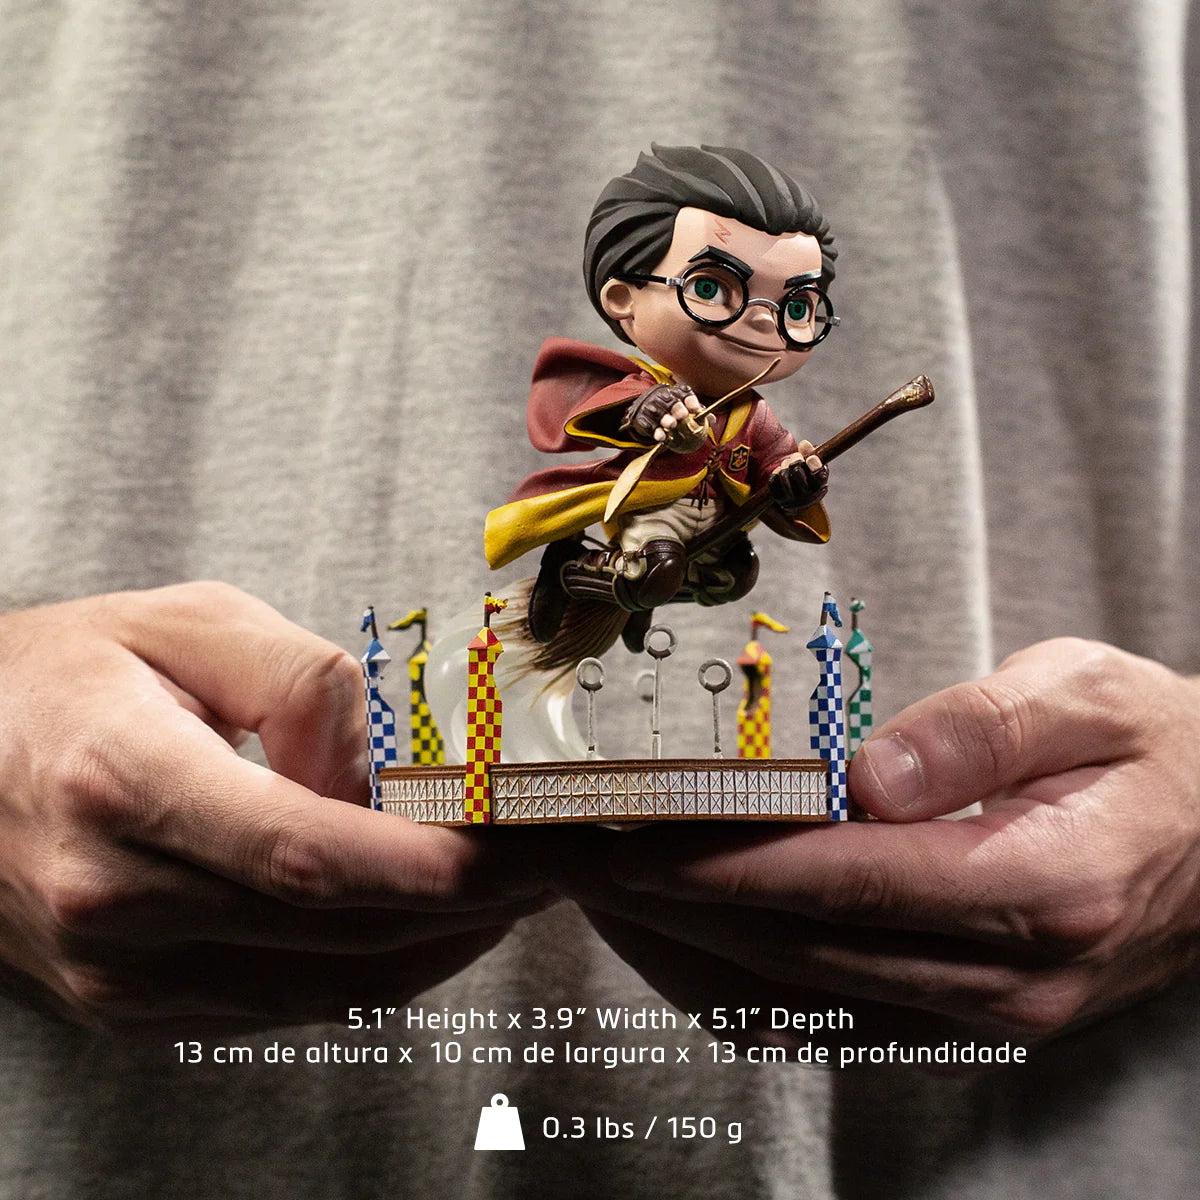 Harry Potter at the Quidditch Match - Harry Potter - MiniCo Illusion By Iron Studios